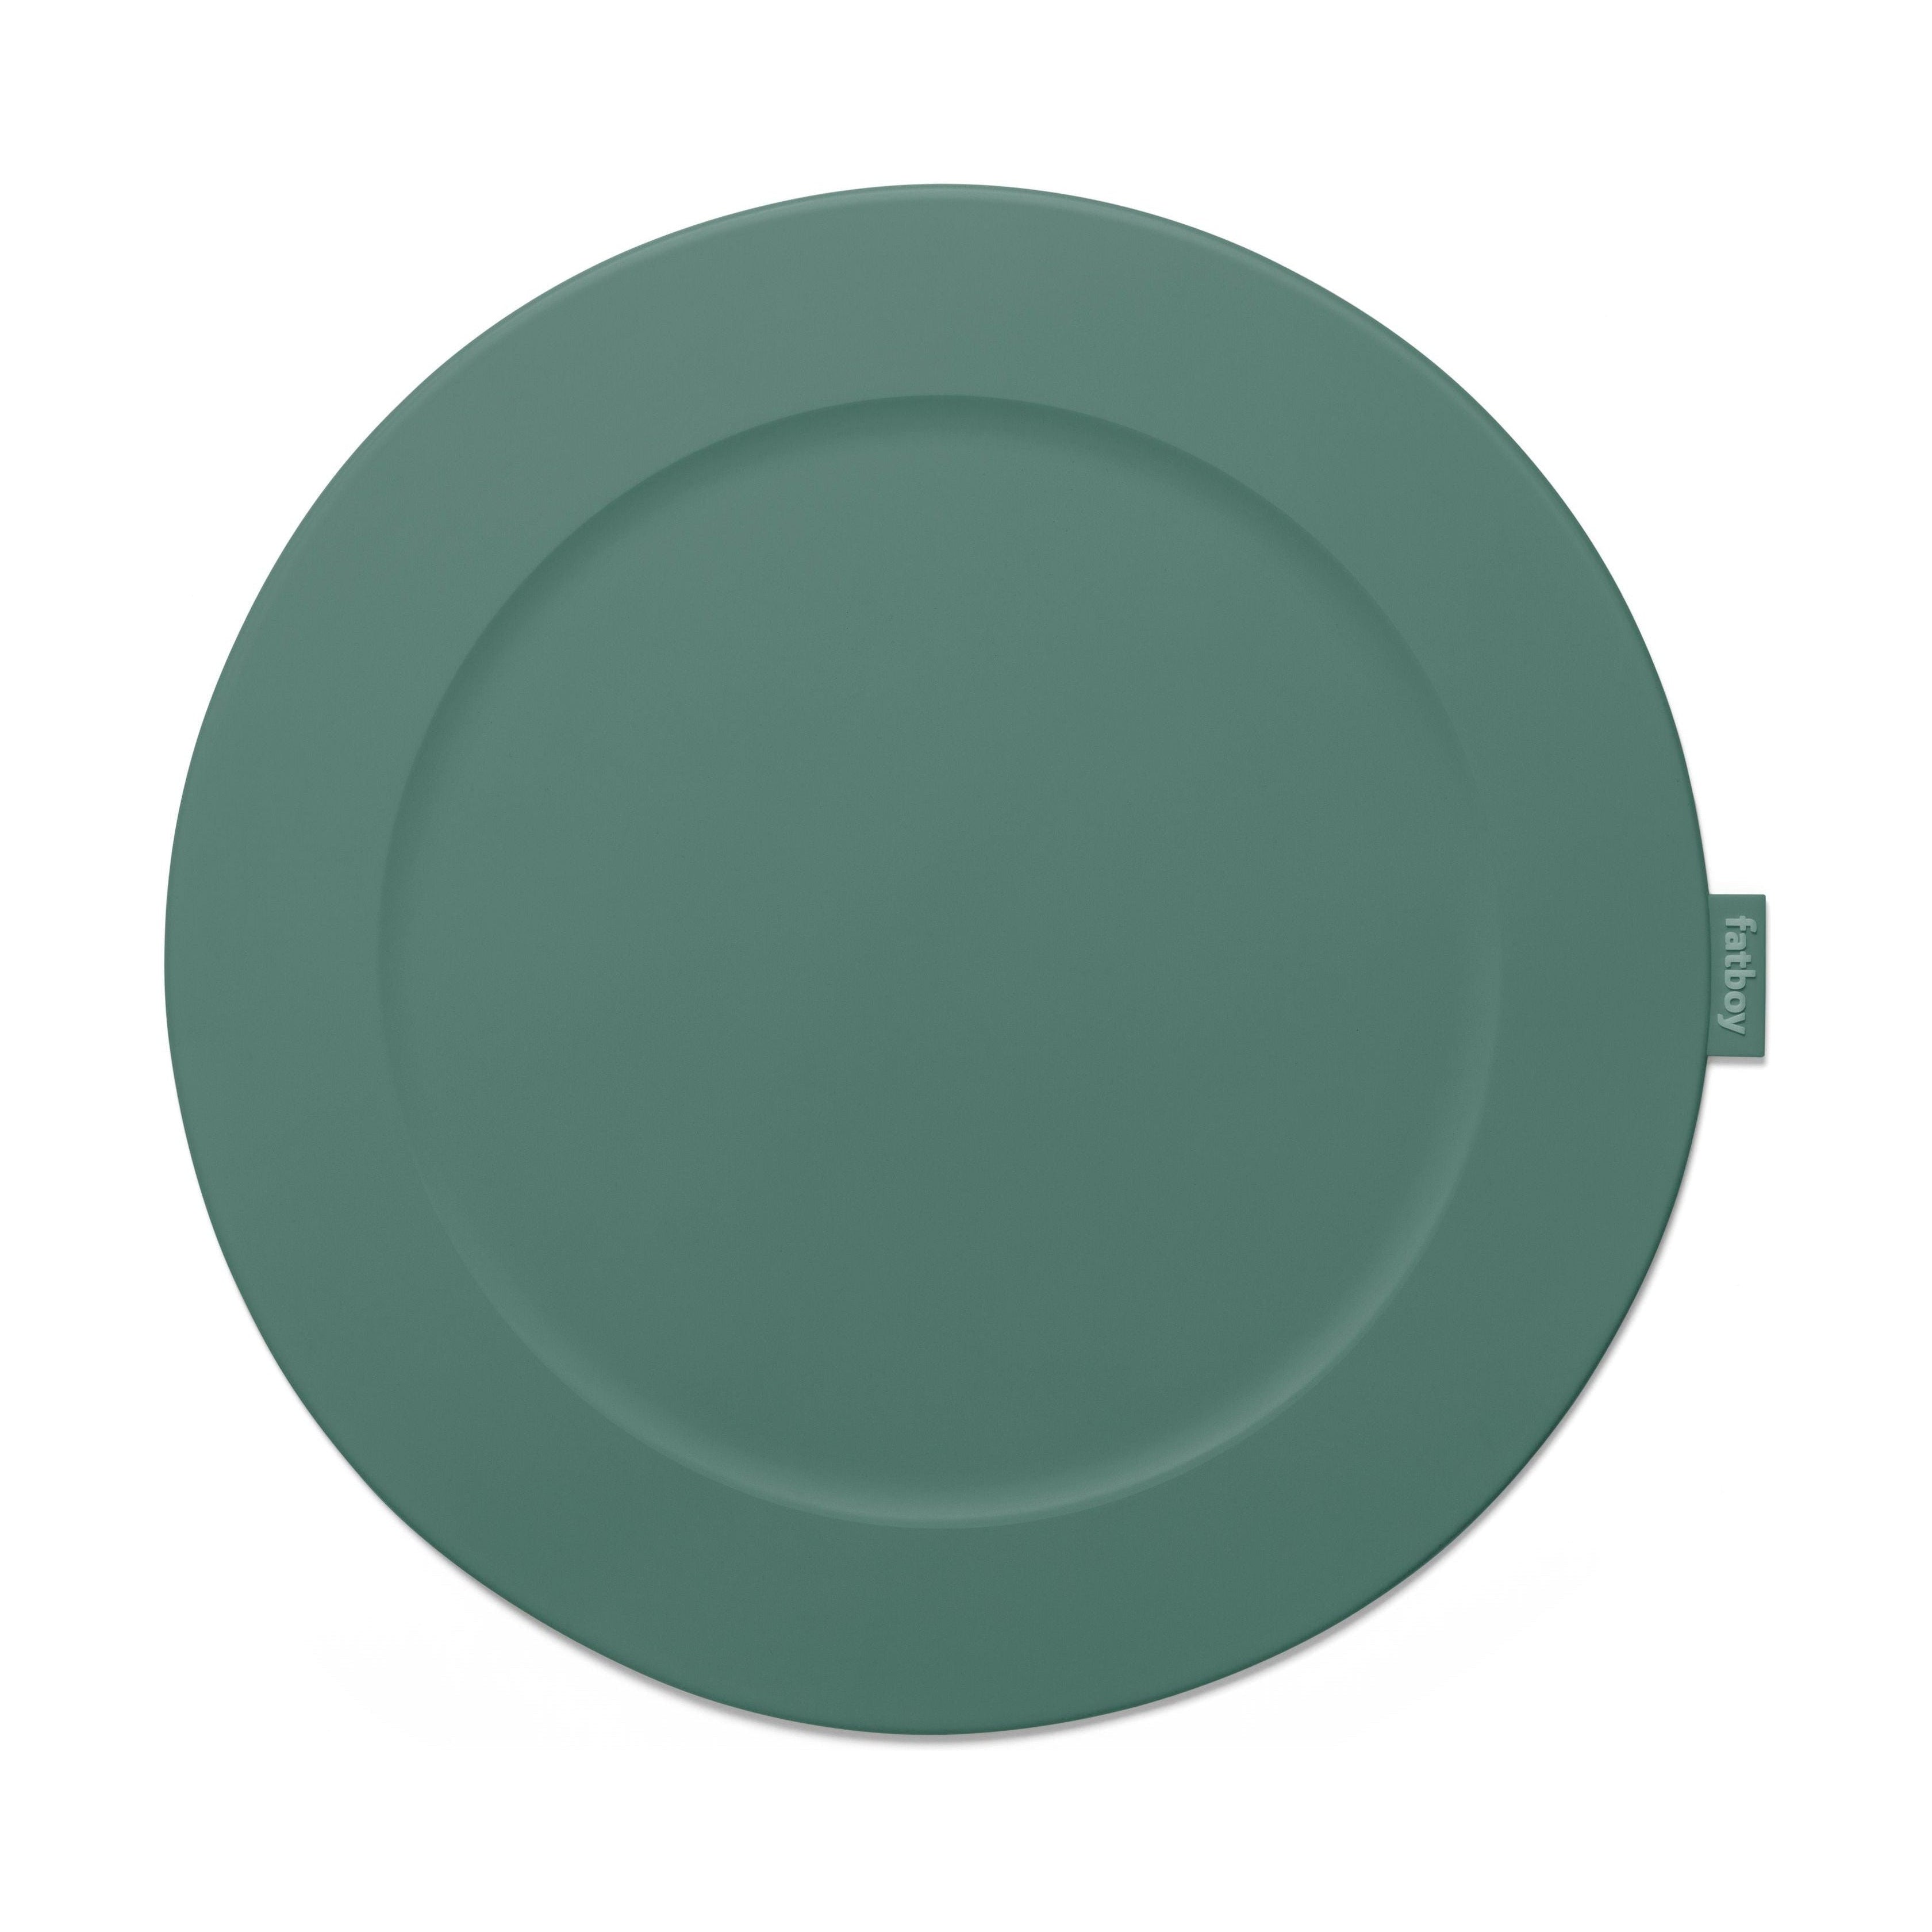 Fatboy Place Wir trafen uns Placemat Pine Green, 2 Stcs.